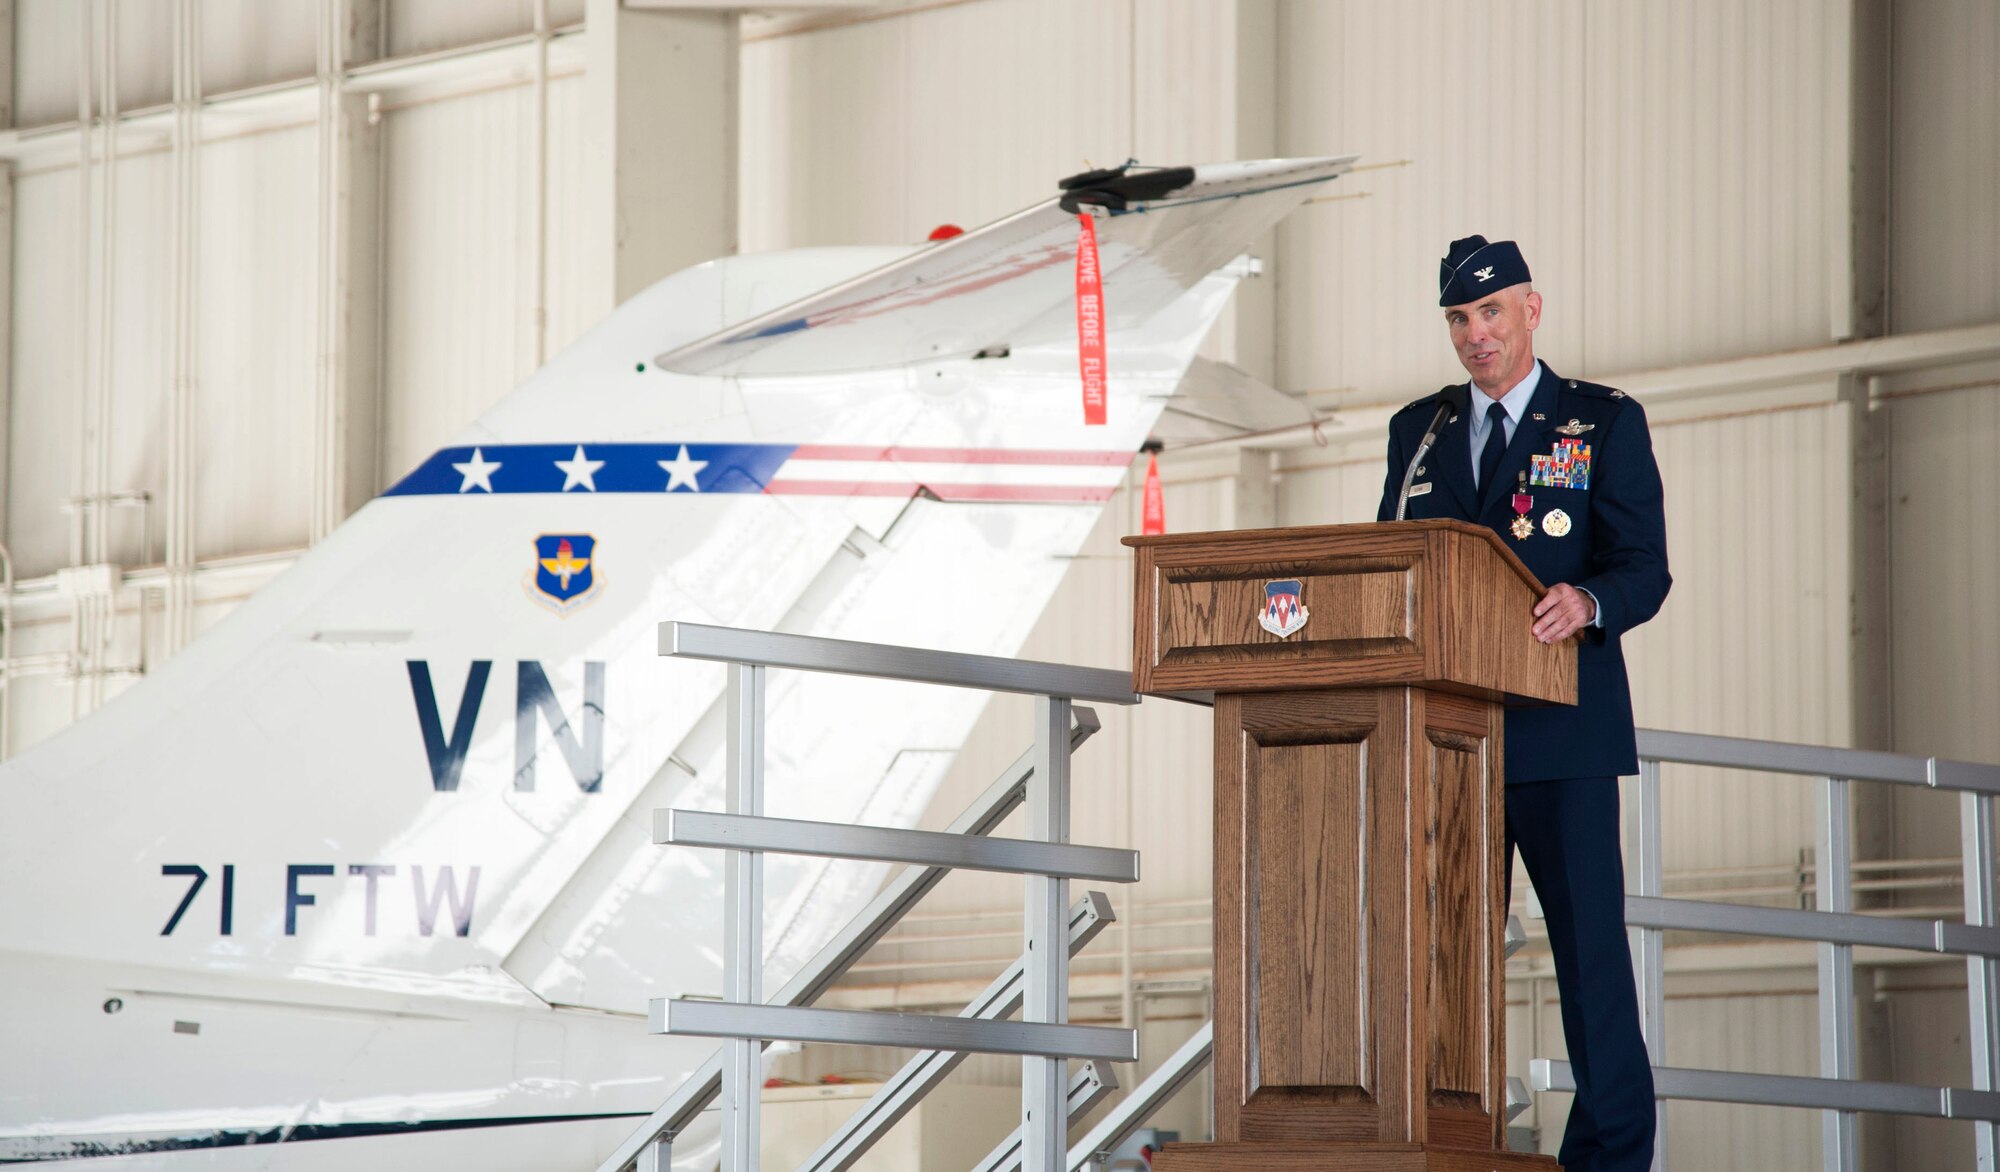 Col. Clark Quinn addresses the men and women of the 71st Flying Training Wing at Vance Air Force Base, Oklahoma, during a change of command ceremony June 28. Quinn relinquished command to Col. Darrell Judy. (U.S. Air Force photo/ Staff Sgt. Nancy Falcon)